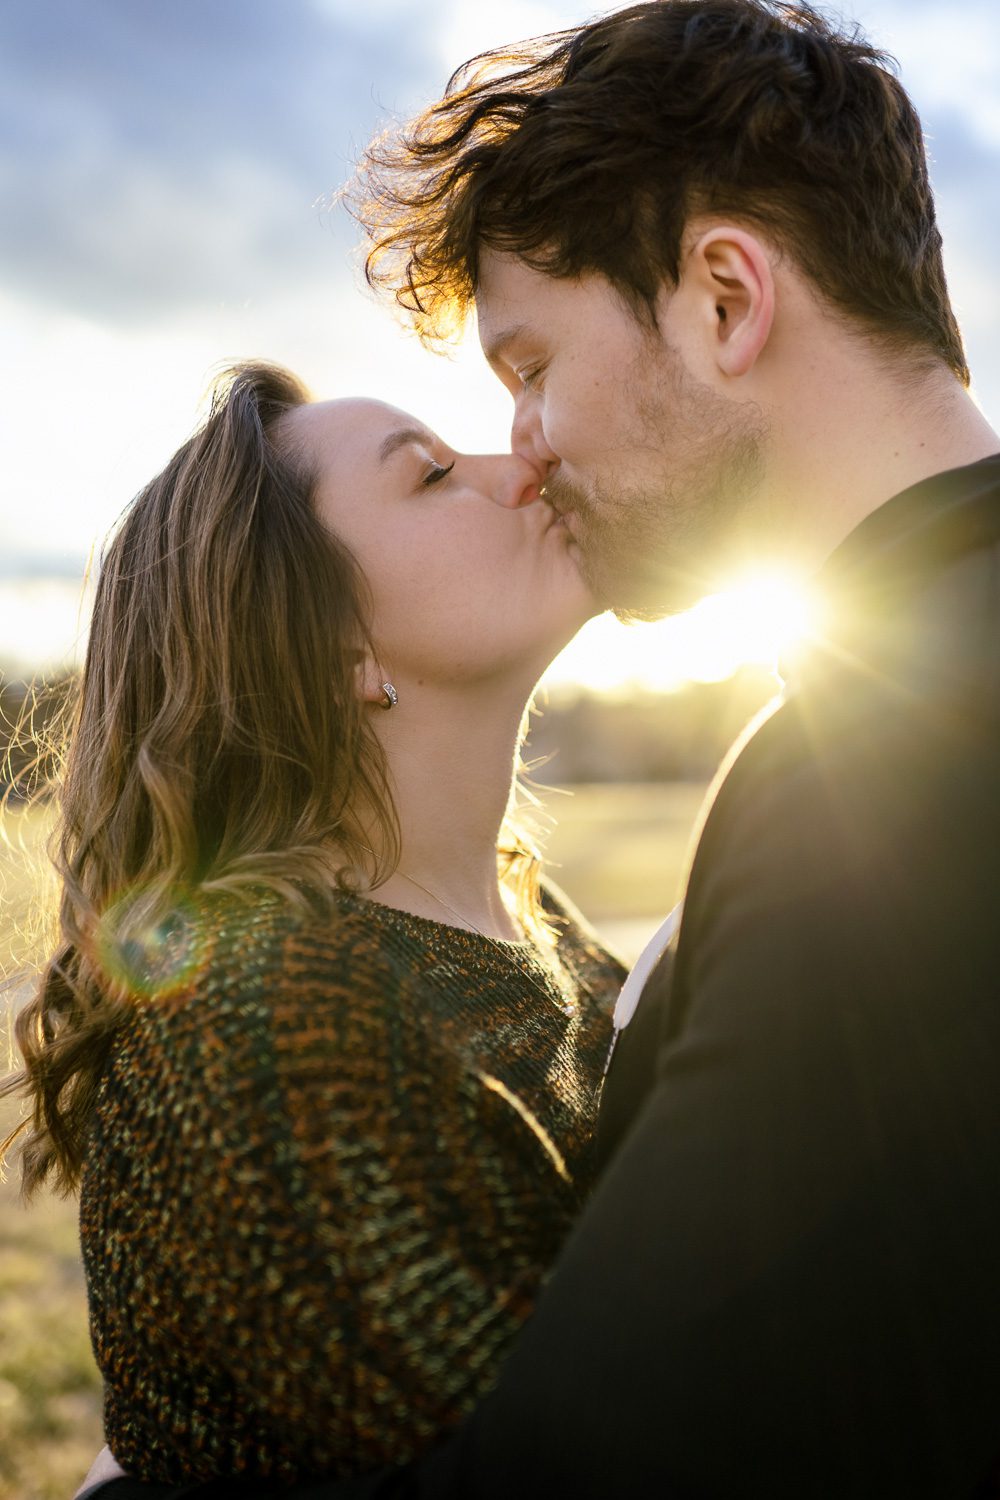 Couple kiss as the sun peaks through on cold day